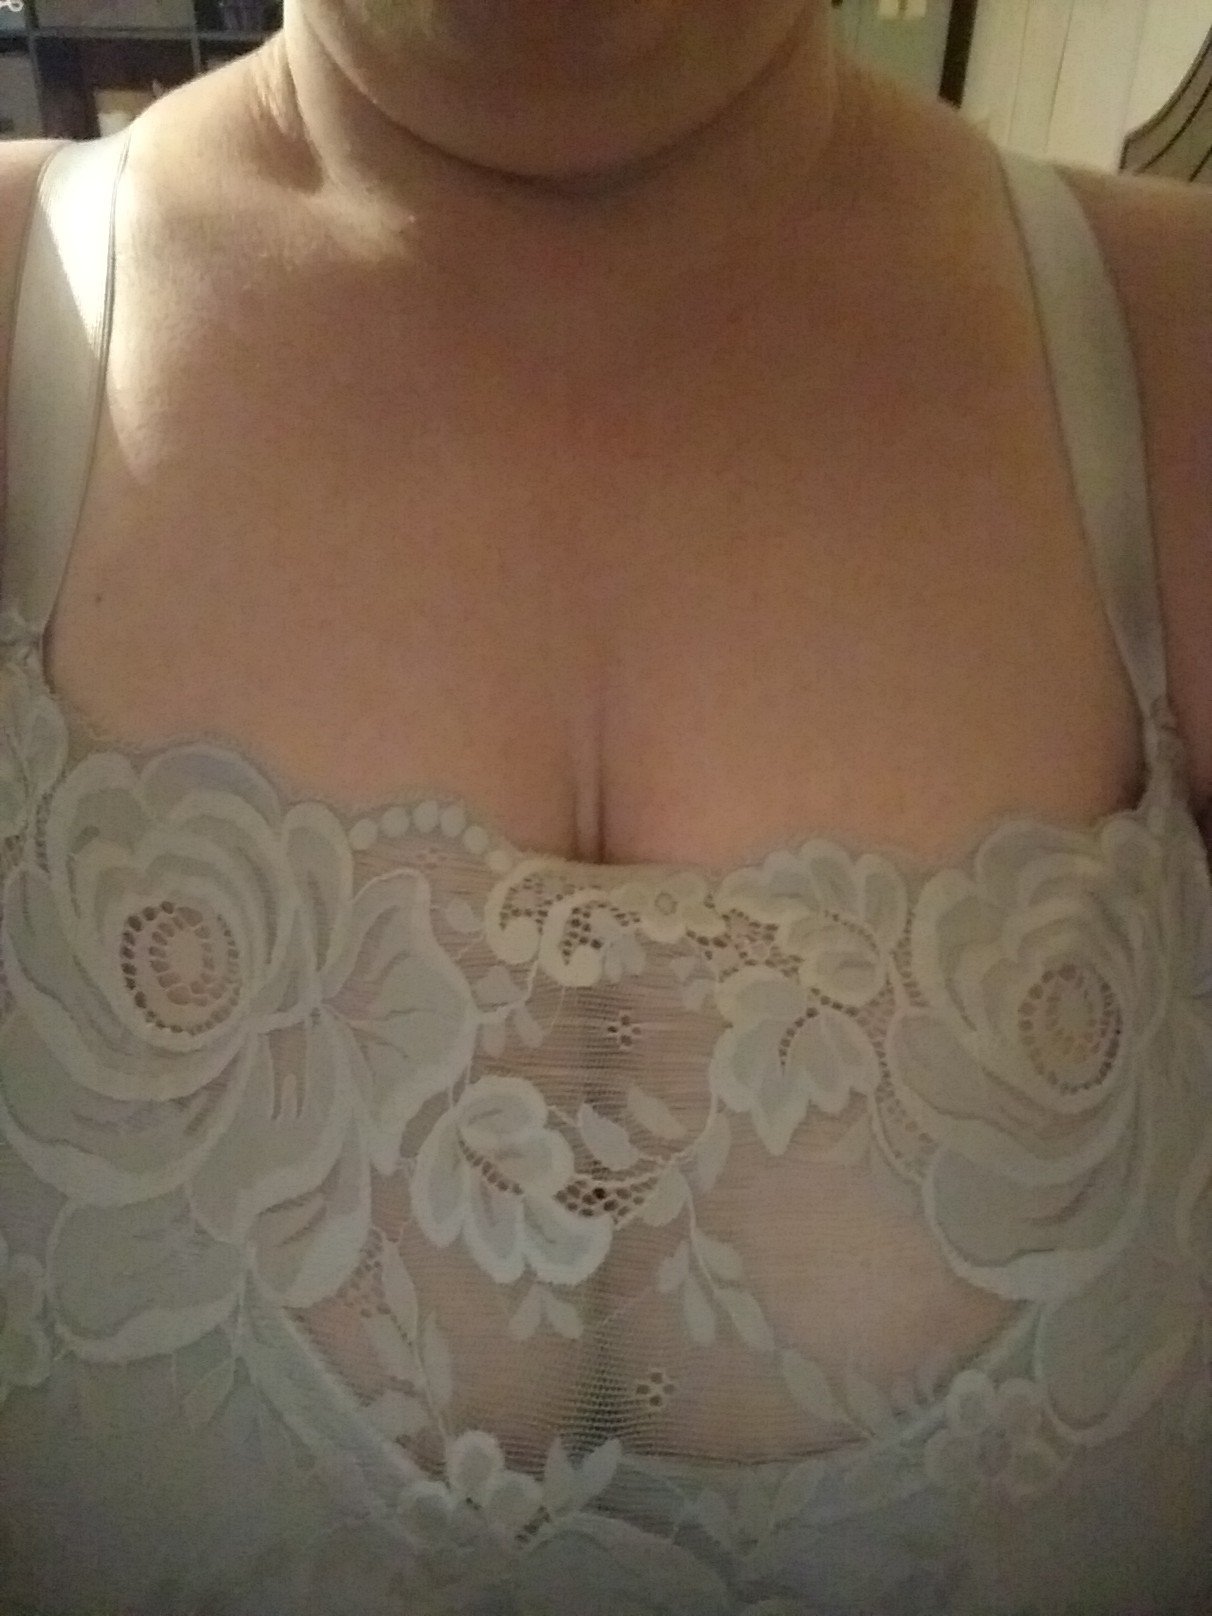 Photo by Touche0677 with the username @Touche0677,  July 12, 2020 at 1:15 AM. The post is about the topic Randoms and the text says 'Been a hot minute since I posted anything, so here is some lacy cleavage'